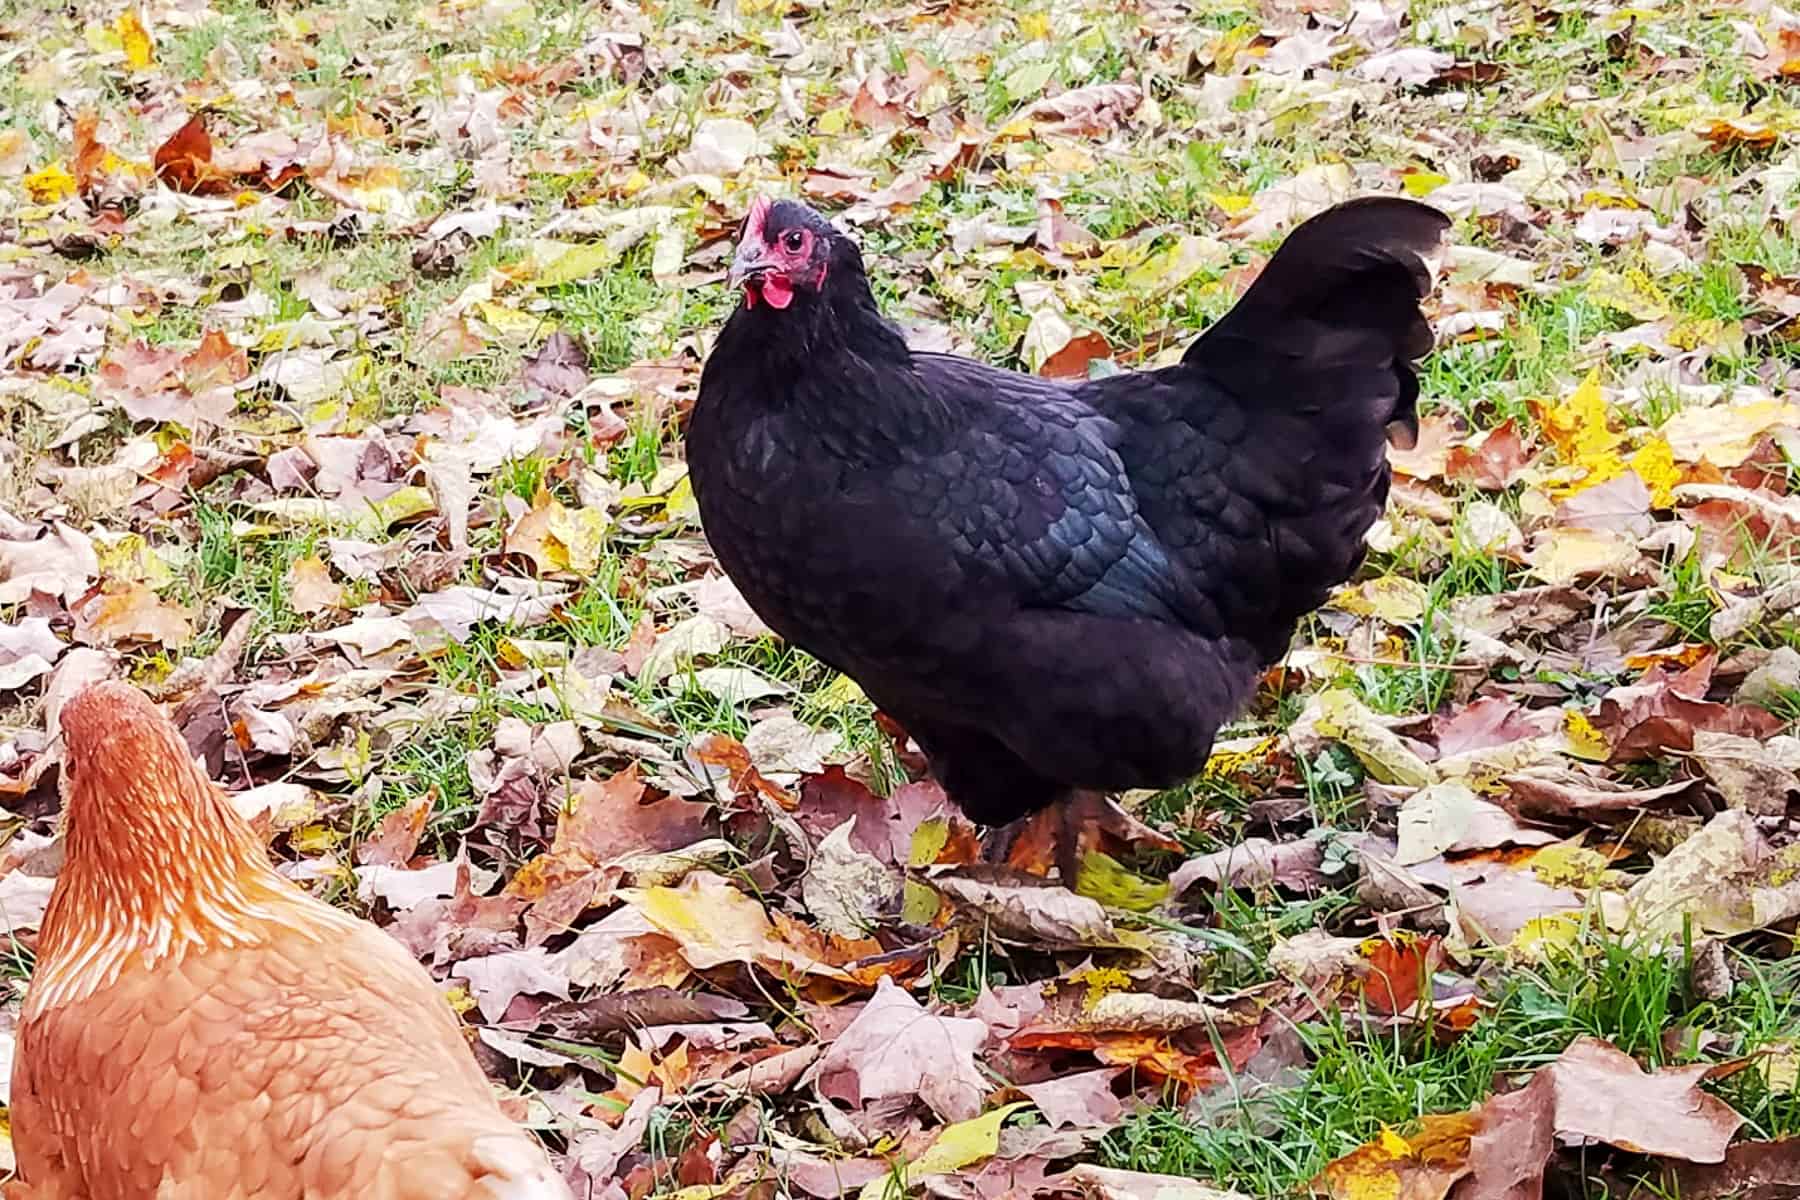 Black Australorp Hen on grass with fall leaves